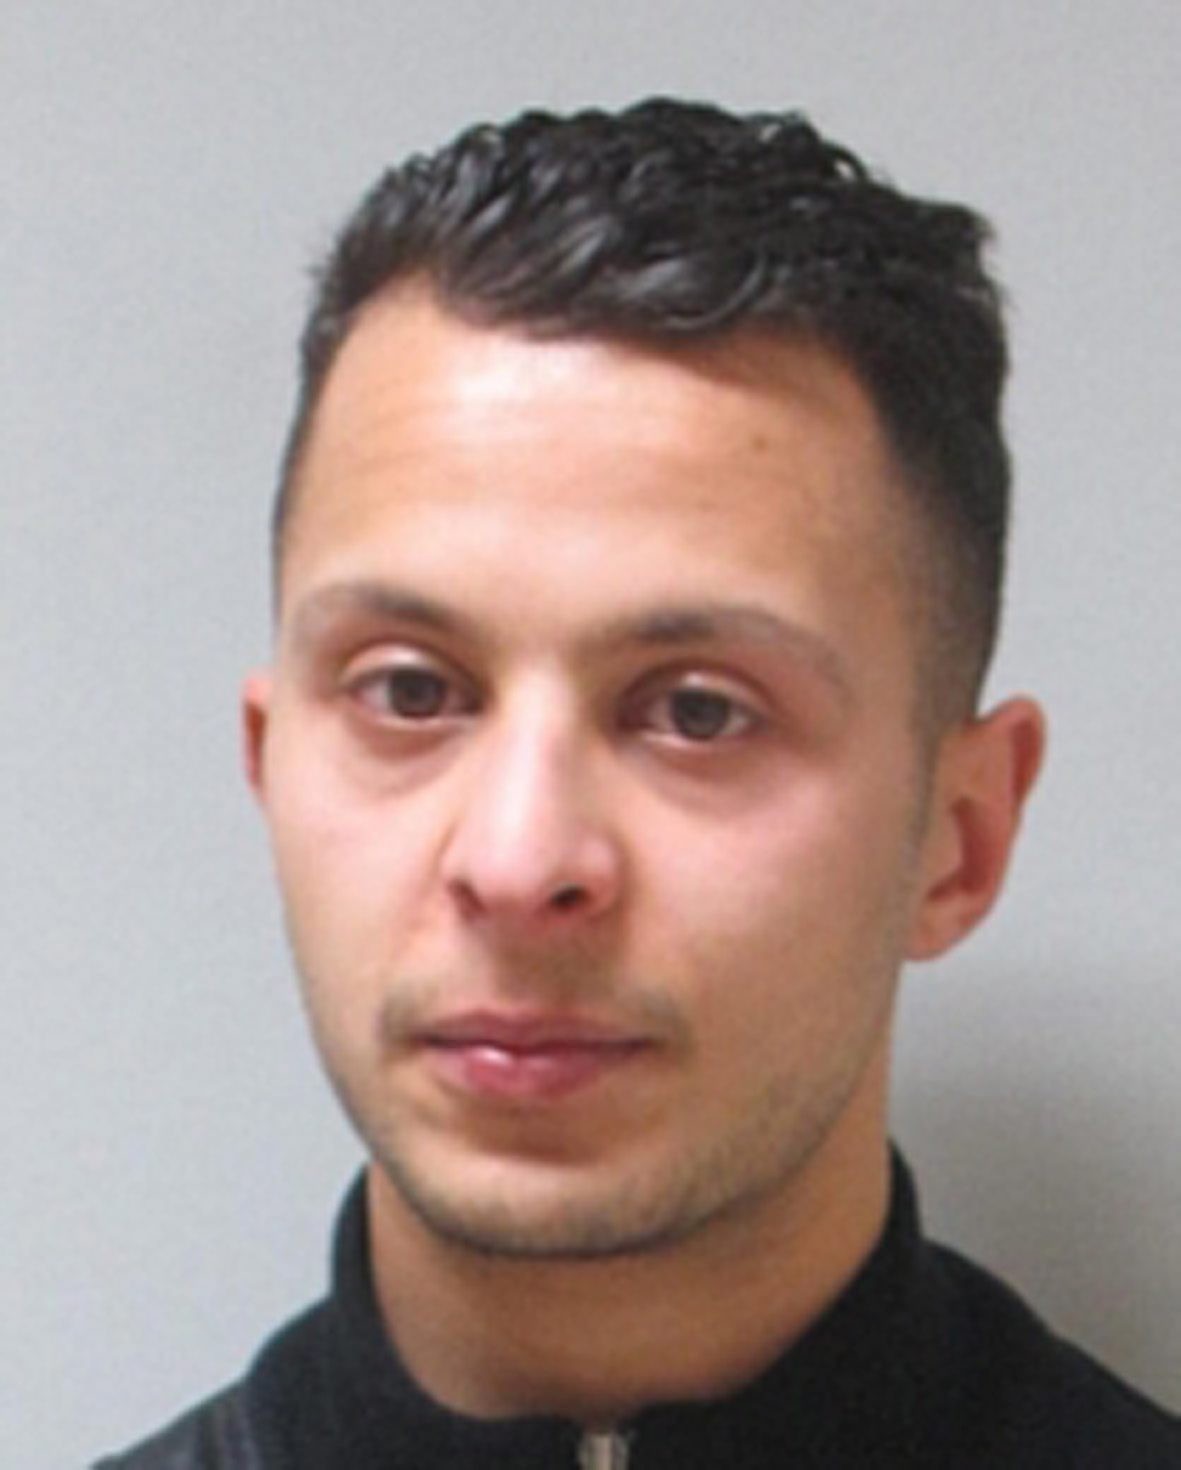 Salah Abdeslam goes on trial this week, becoming the only member of the terrorist cell linked to the carnage in Paris and Brussels in 2015 to face court